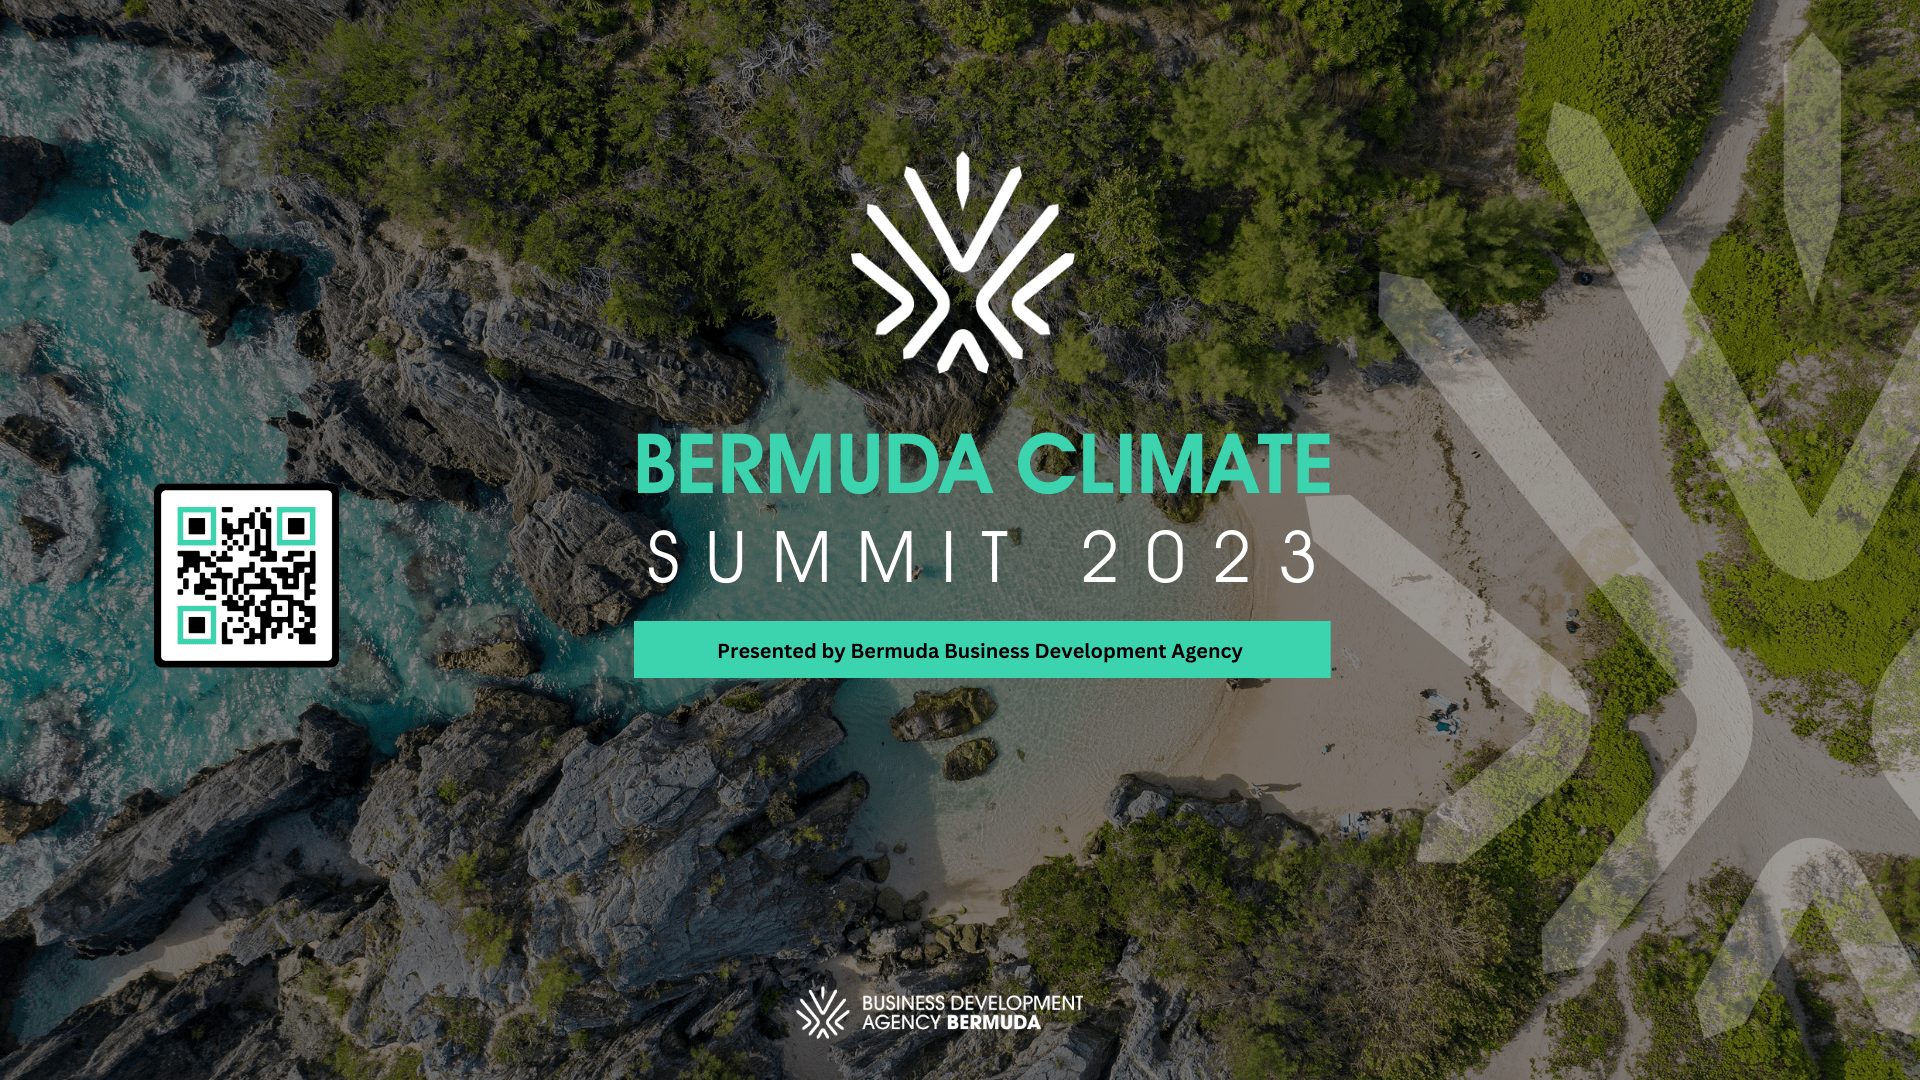 Eight Local Environmental Charities to be Highlighted at Bermuda Climate Summit